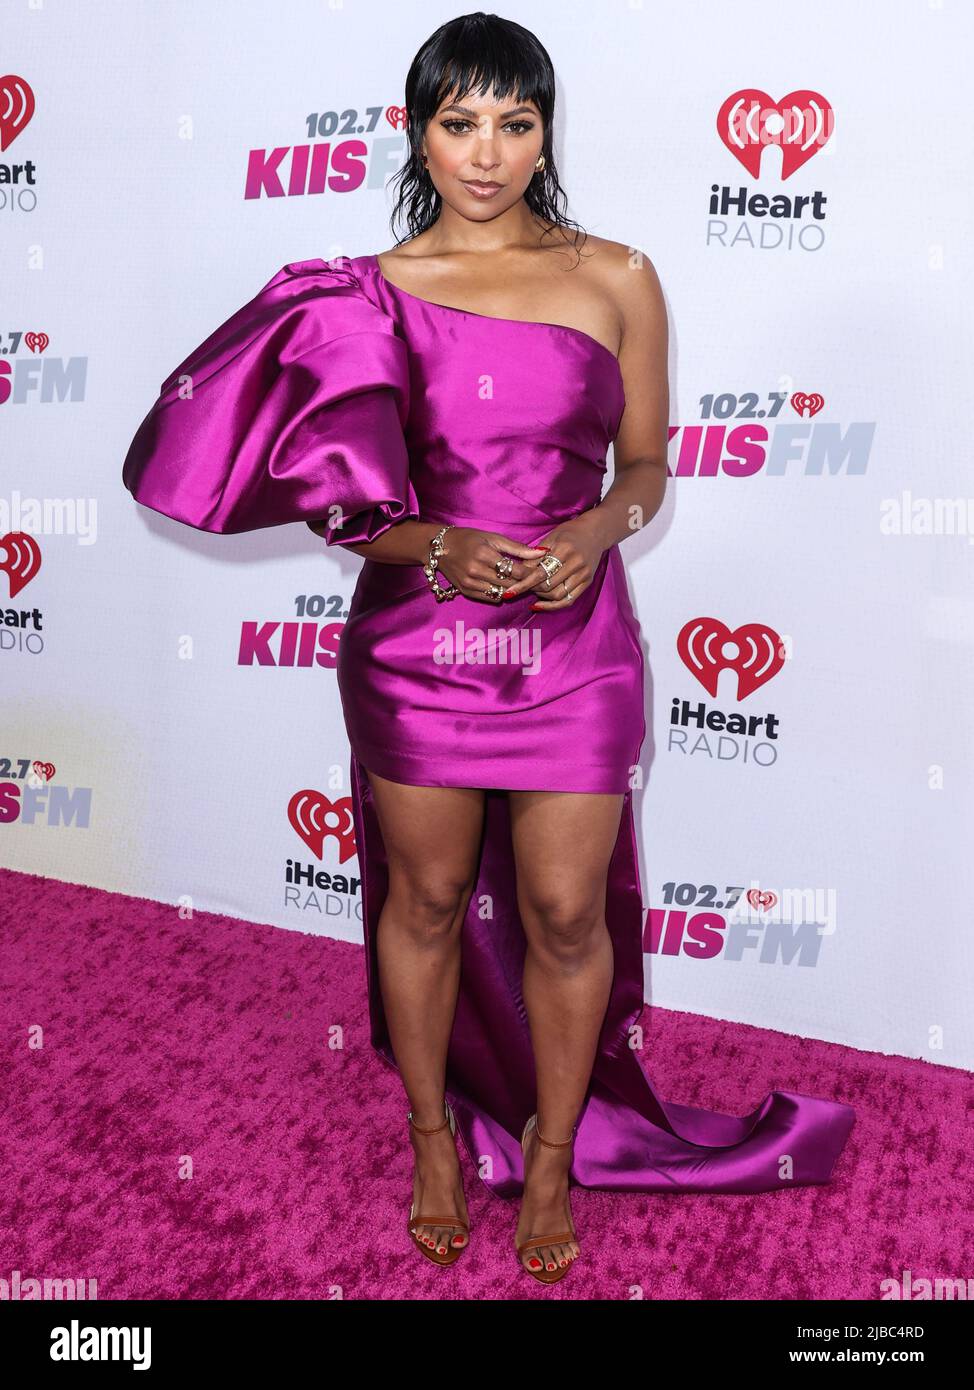 Beregn Formand Panda CARSON, LOS ANGELES, CALIFORNIA, USA - JUNE 04: American actress Kat Graham  attends the 2022 iHeartRadio Wango Tango held at Dignity Health Sports Park  on June 4, 2022 in Carson, Los Angeles,